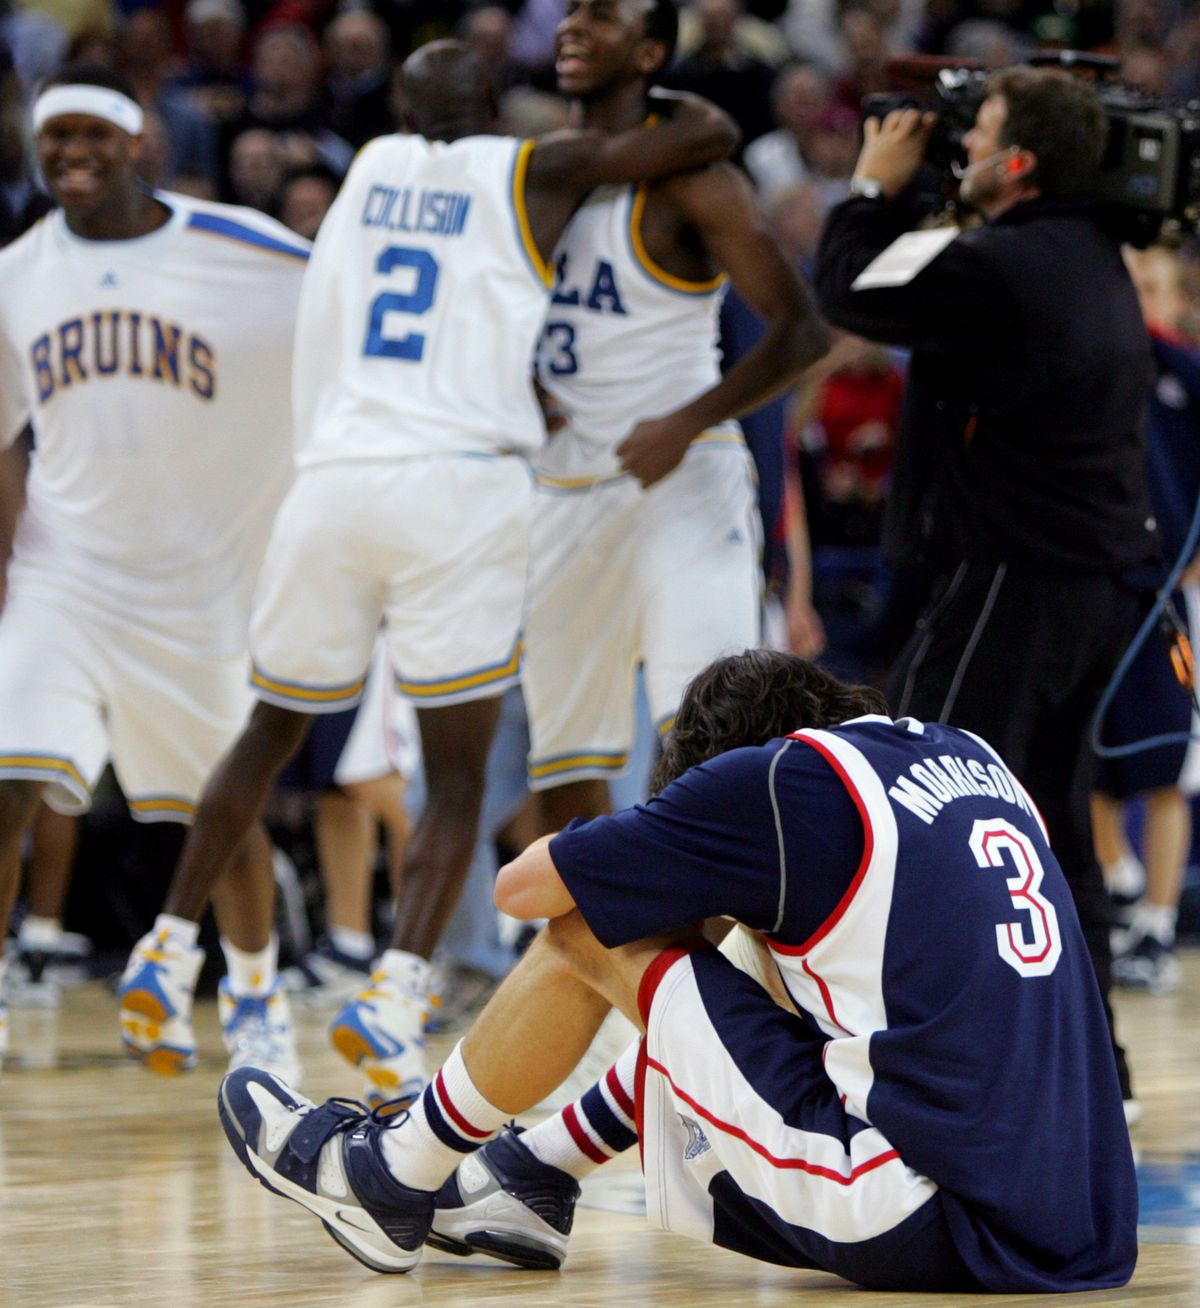 Gonzaga star Adam Morrison, who scored 24 points, is overcome by the agony of defeat after 2006 loss to UCLA in Sweet 16. (Associated Press)